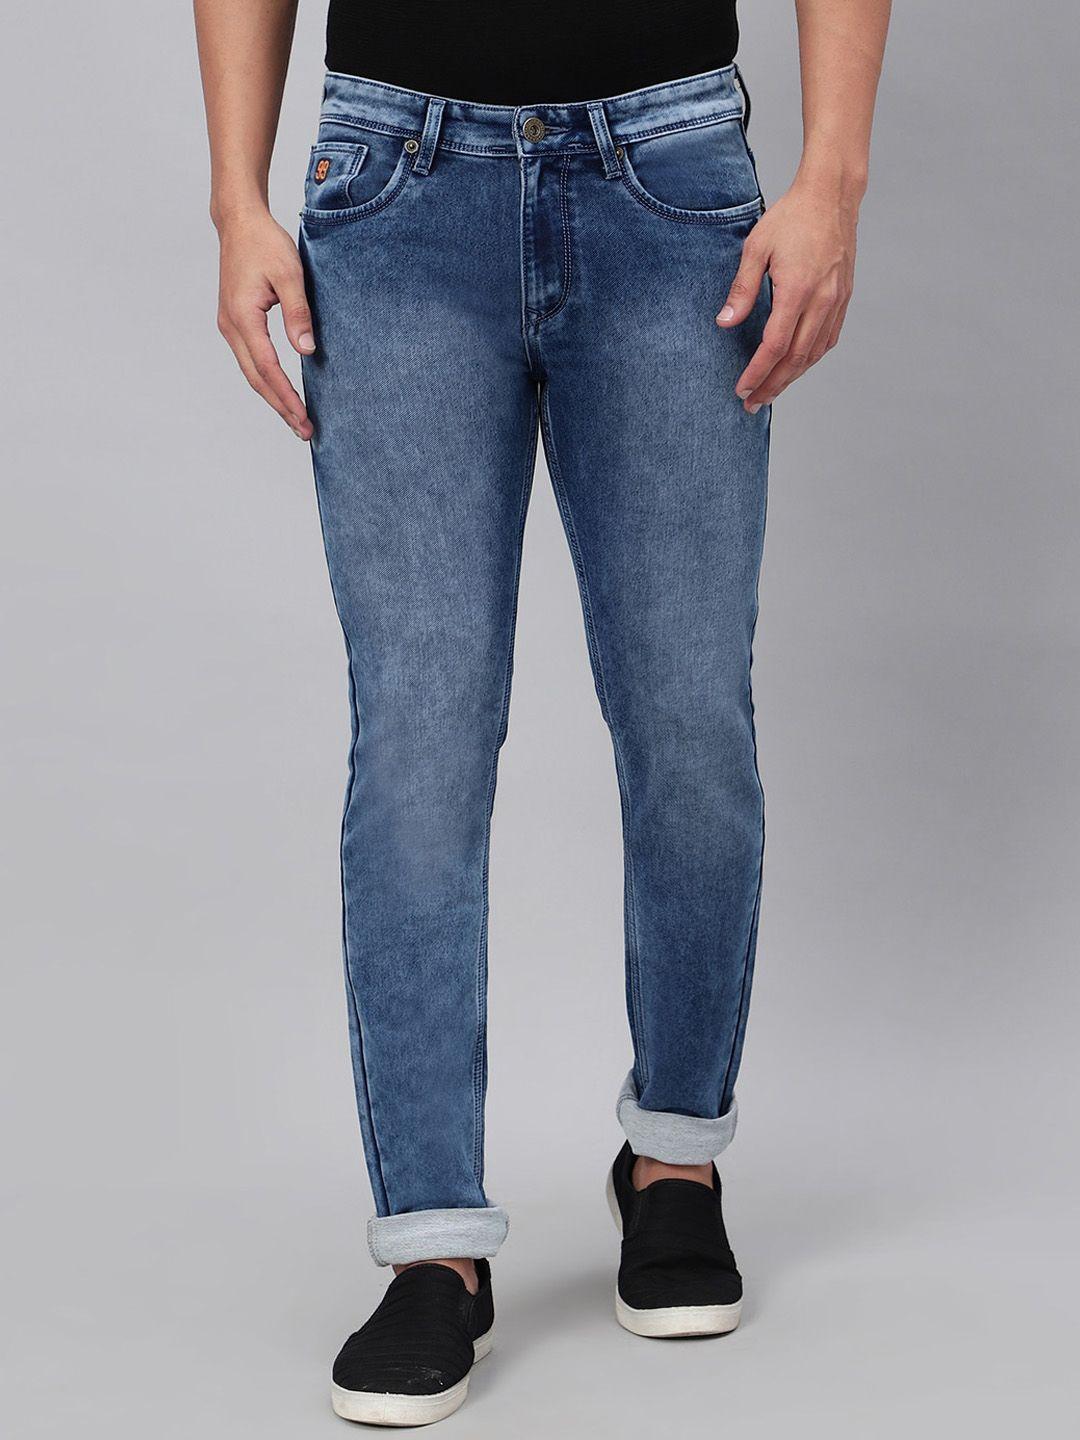 hj-hasasi-men-relaxed-fit-heavy-fade-stretchable-jeans